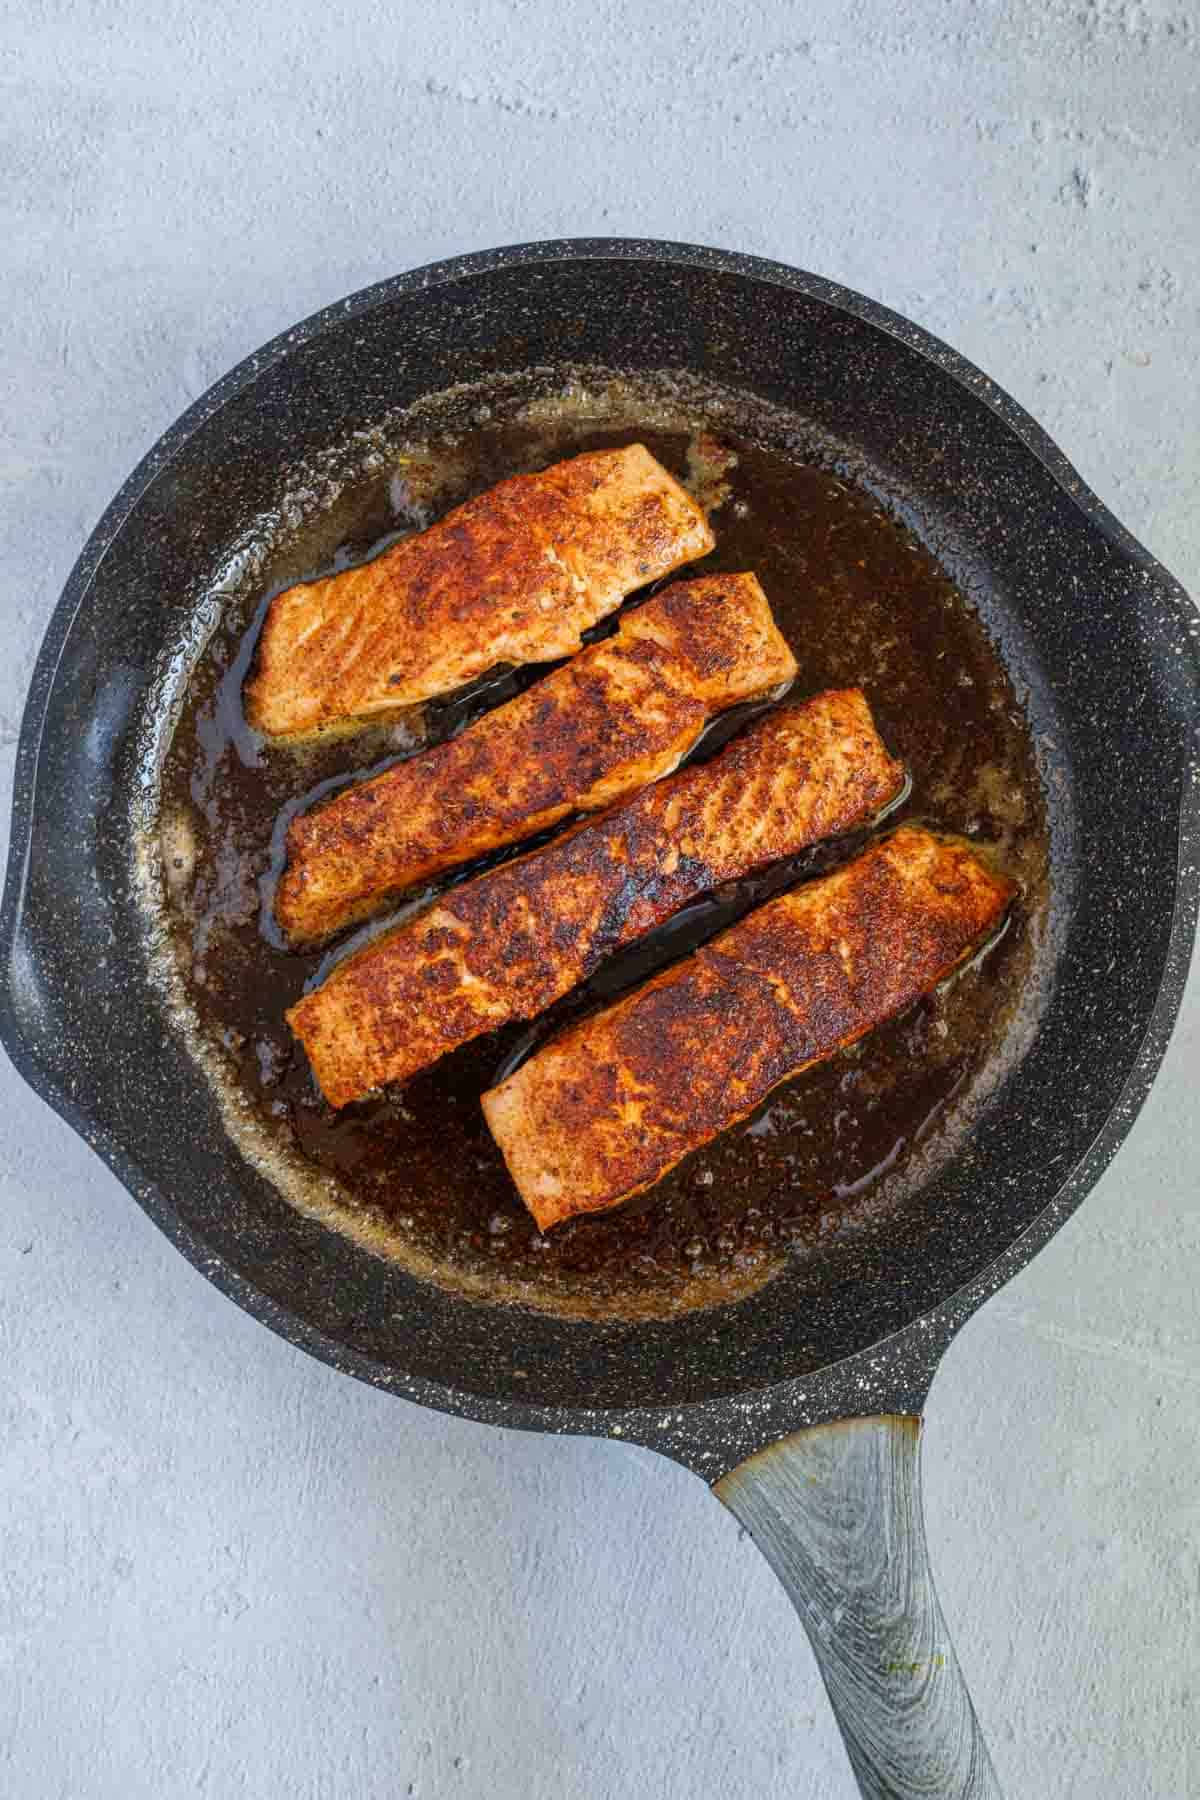 Salmon fillets cooking in a cast iron pan.